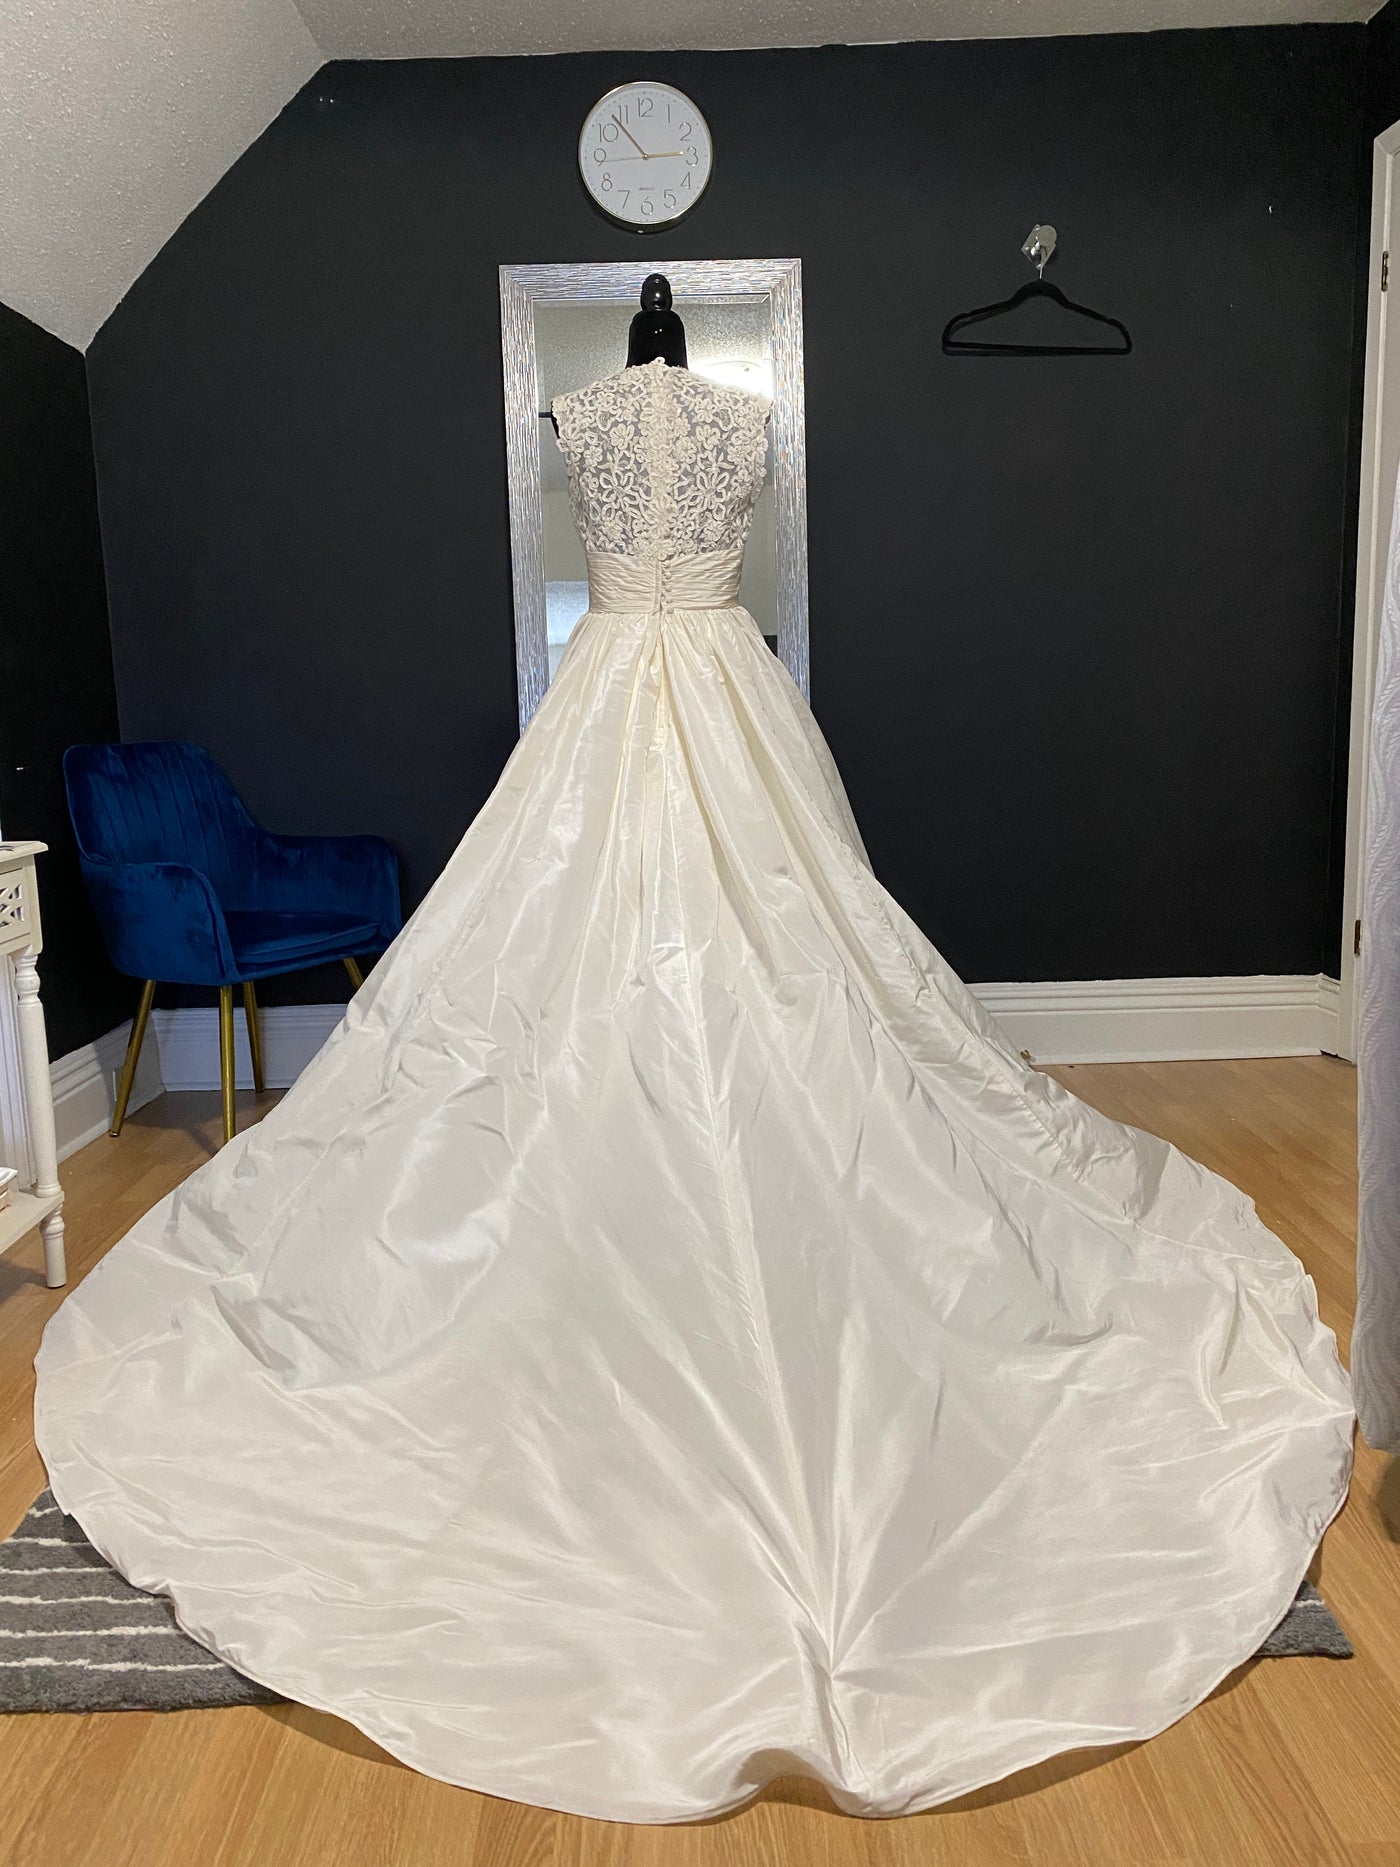 An elegant white Watters "Escalante" bridal gown with lace top and a cathedral train displayed in a room with dark walls and a blue chair.